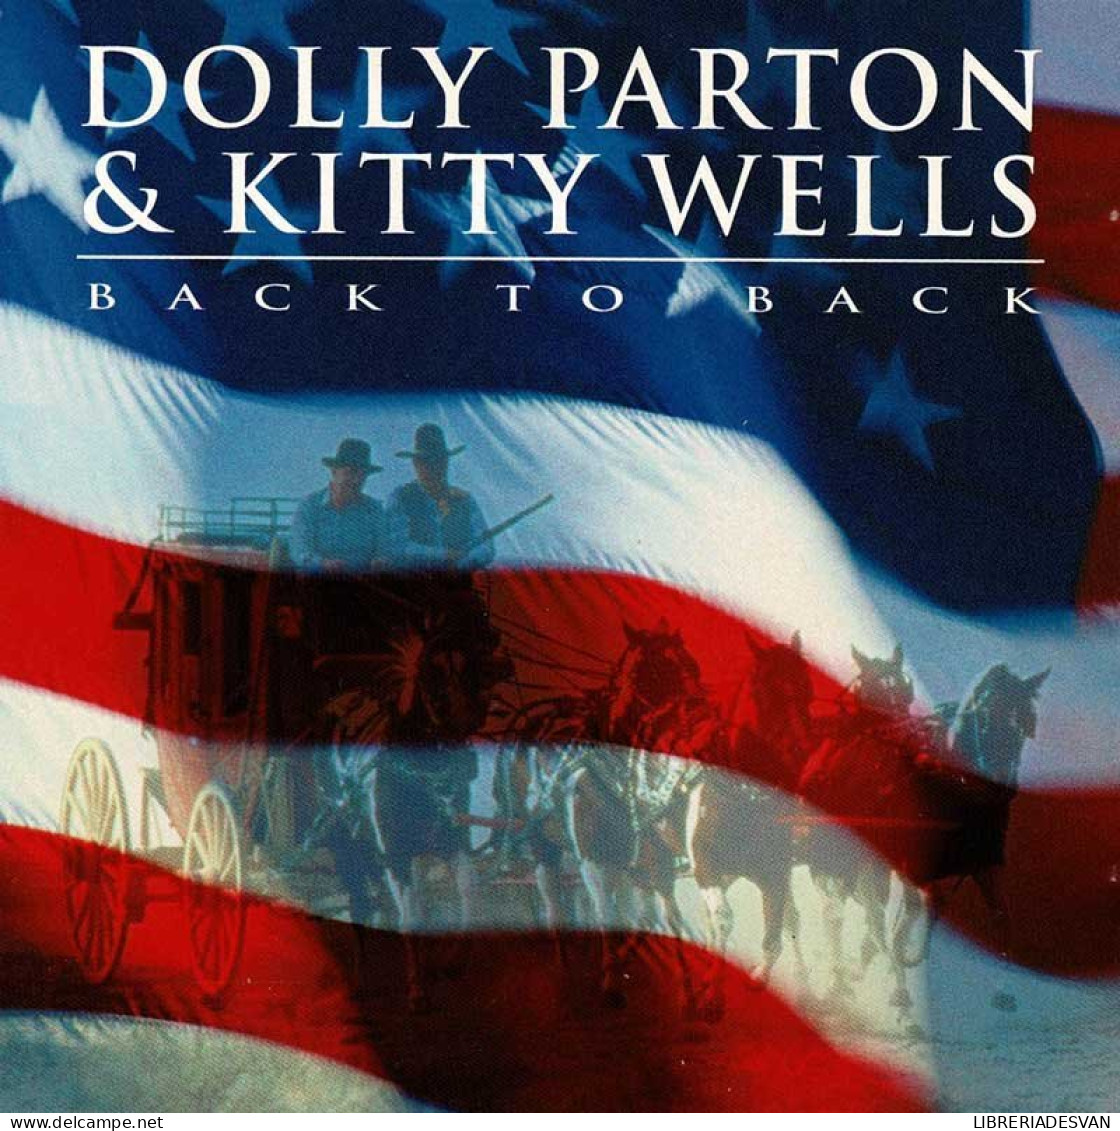 Dolly Parton & Kitty Wells - Back To Back. CD - Country & Folk